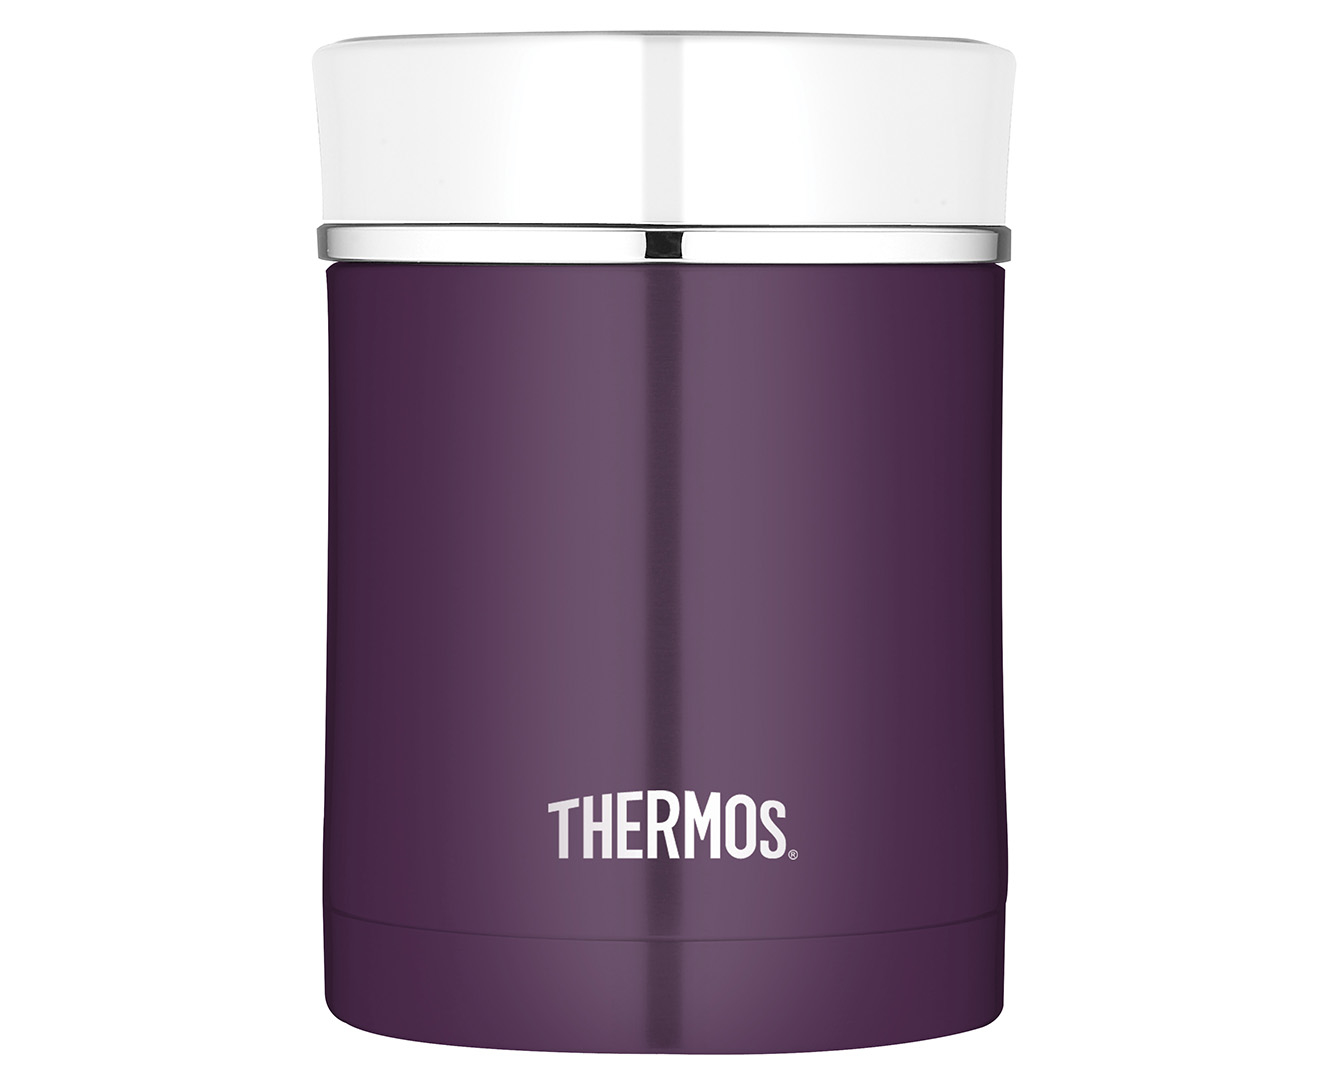 Thermos Sipp 470mL Stainless Steel Vacuum Insulated Food Jar - Plum